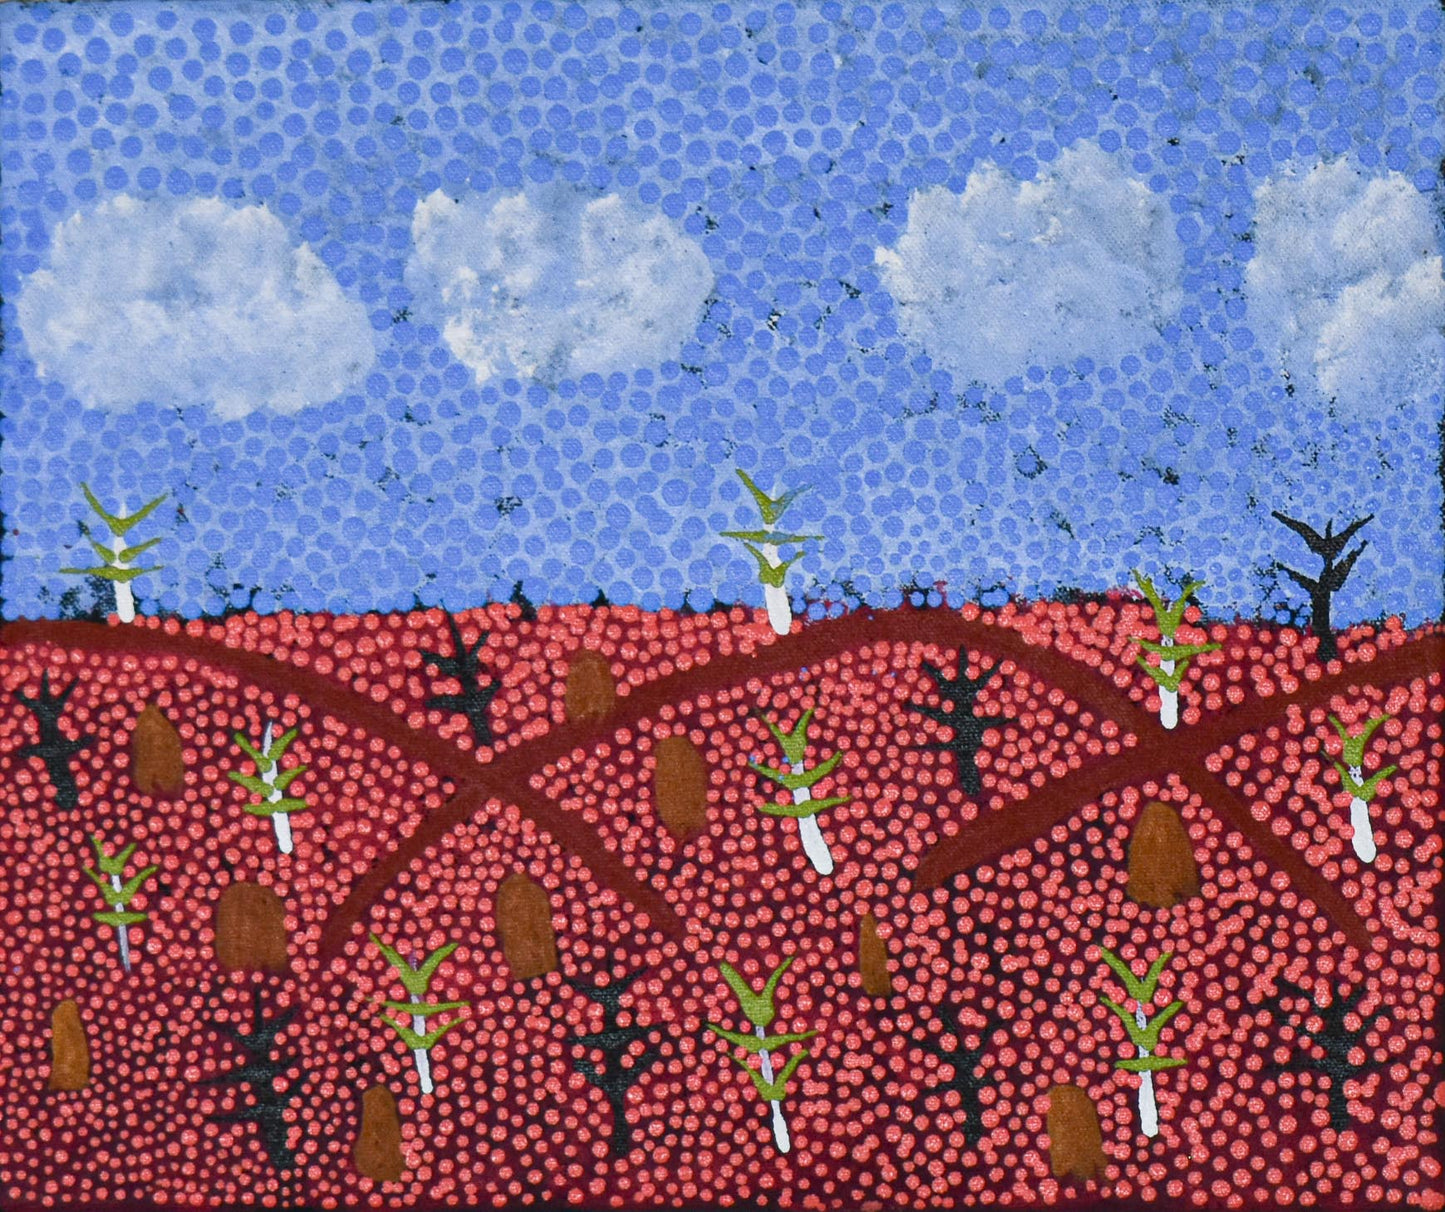 Countryside After Fire, 25x31cm